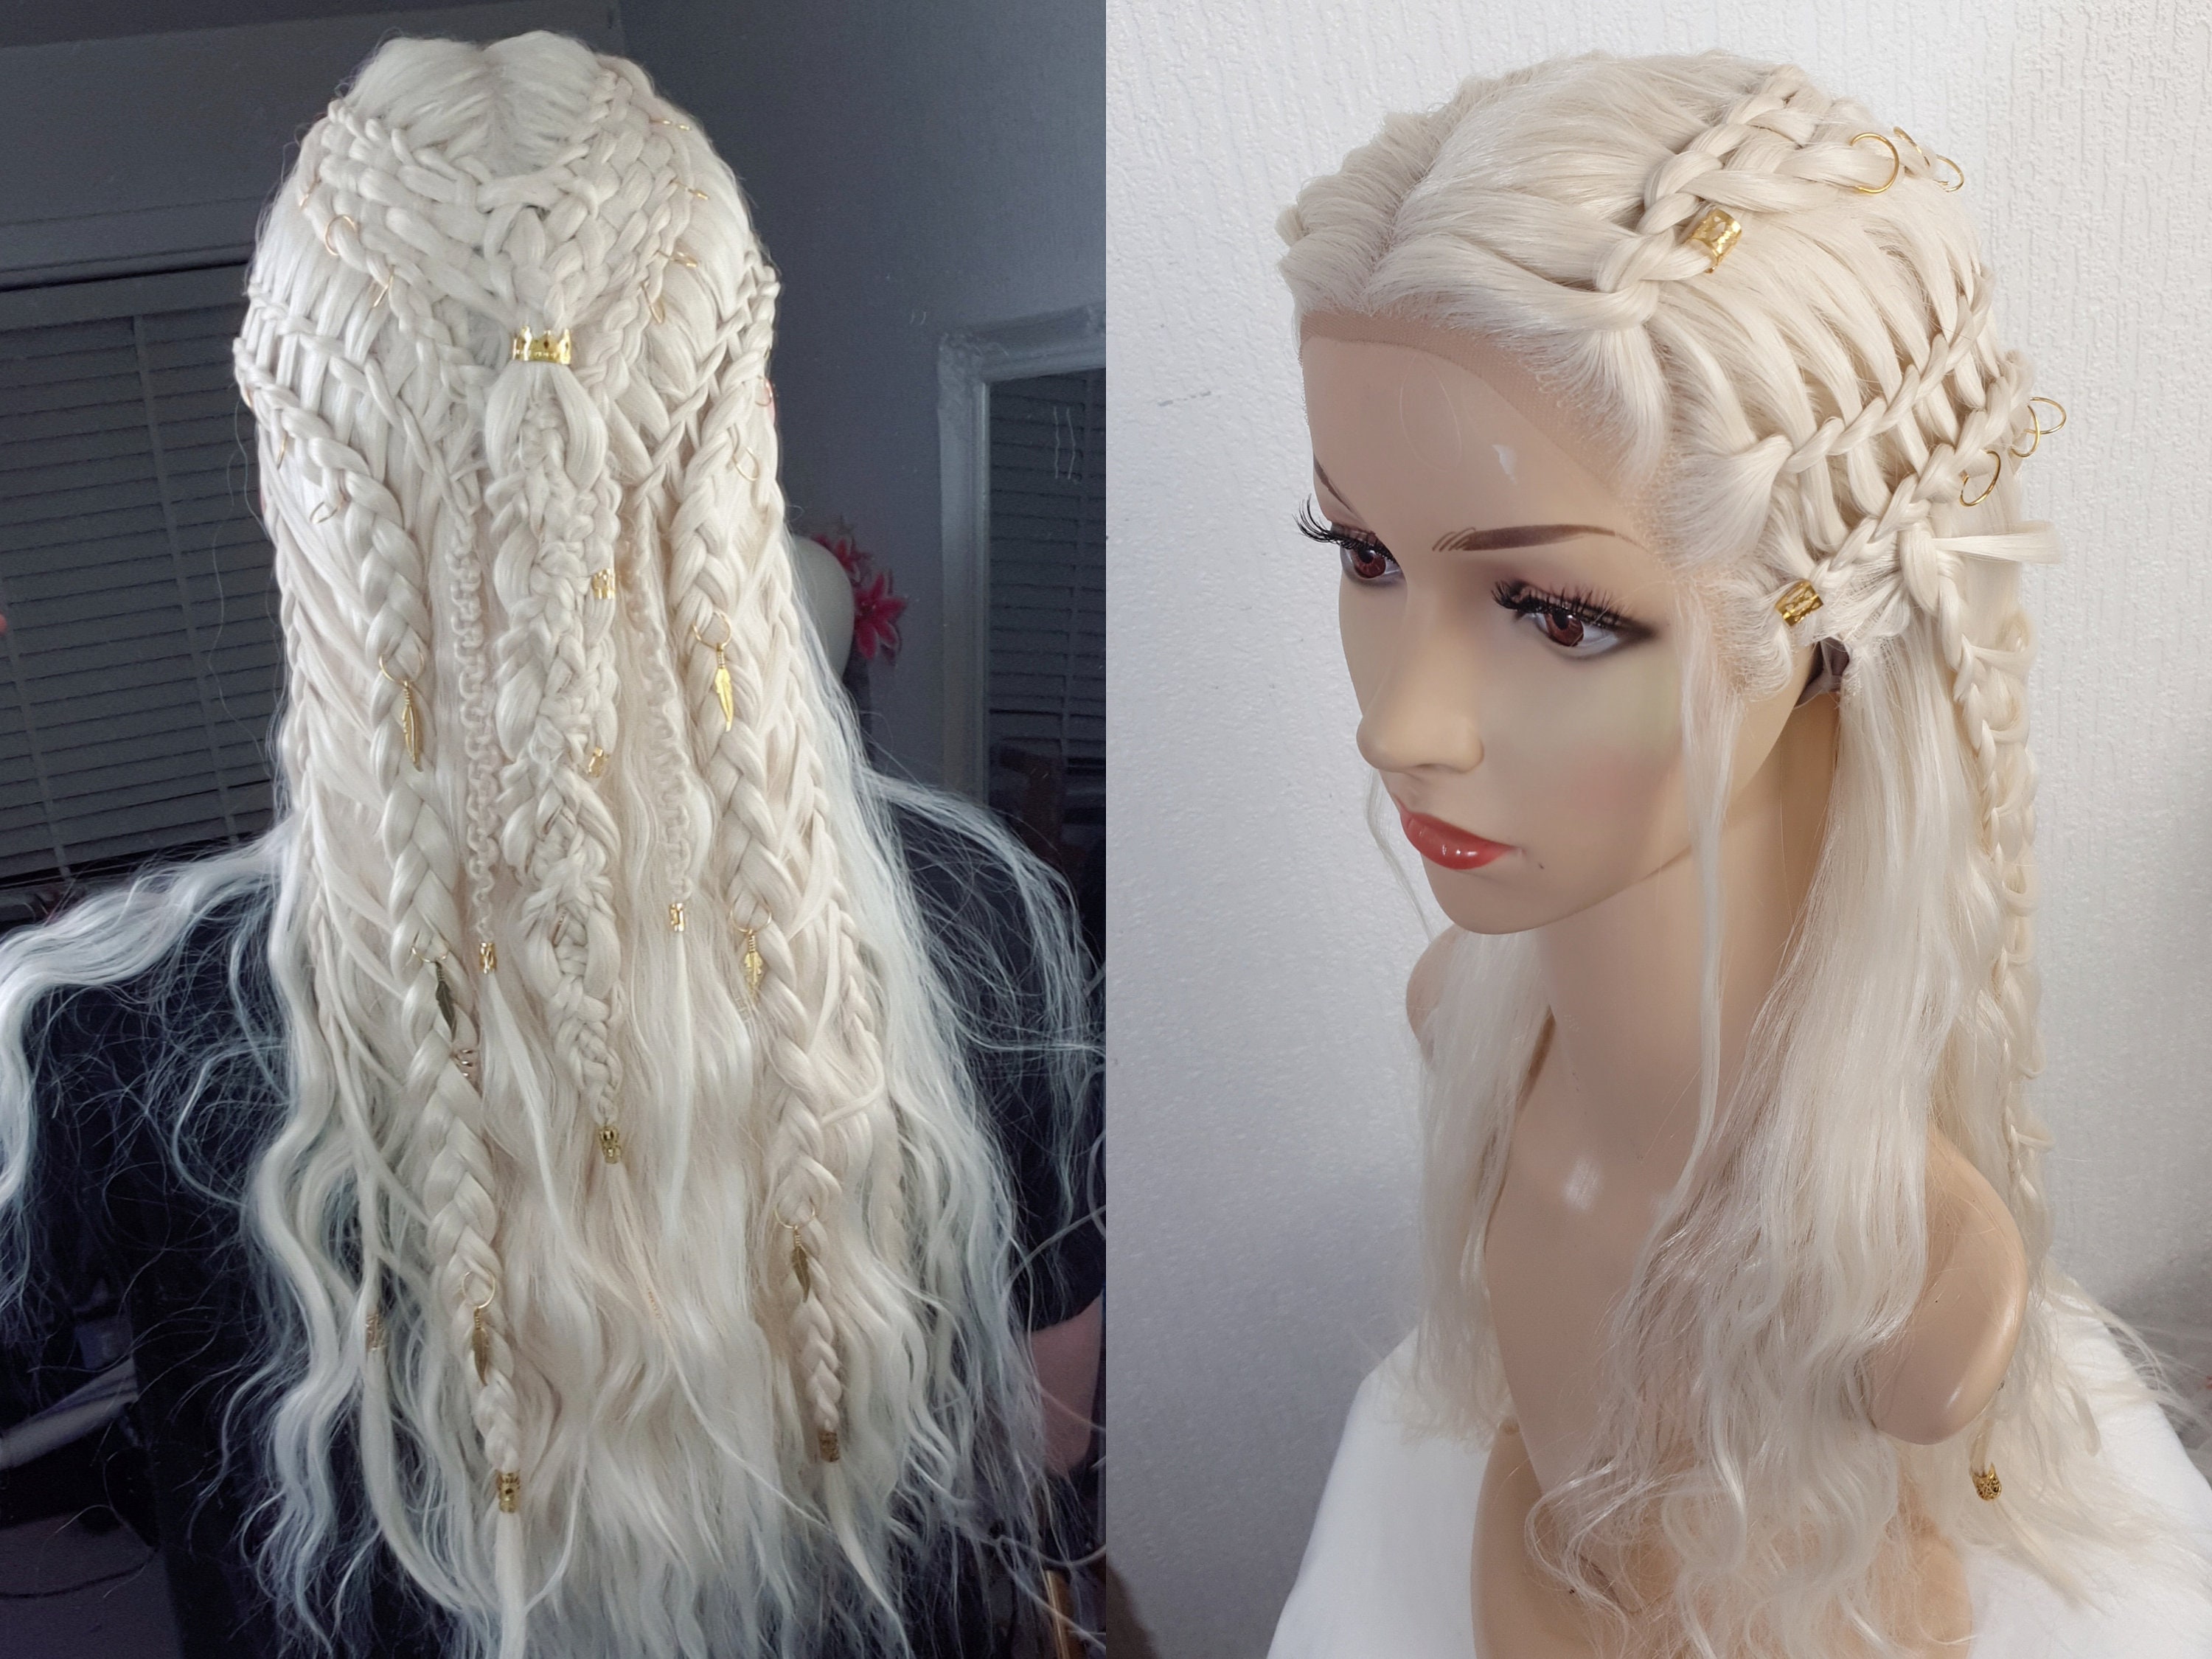 Orm Lace Front Wig Including Hair Accessories, Cosplay Wig, Larp Wig,  Custom Wig, Synthetic Wig, Viking Wig, Dutch Braids 